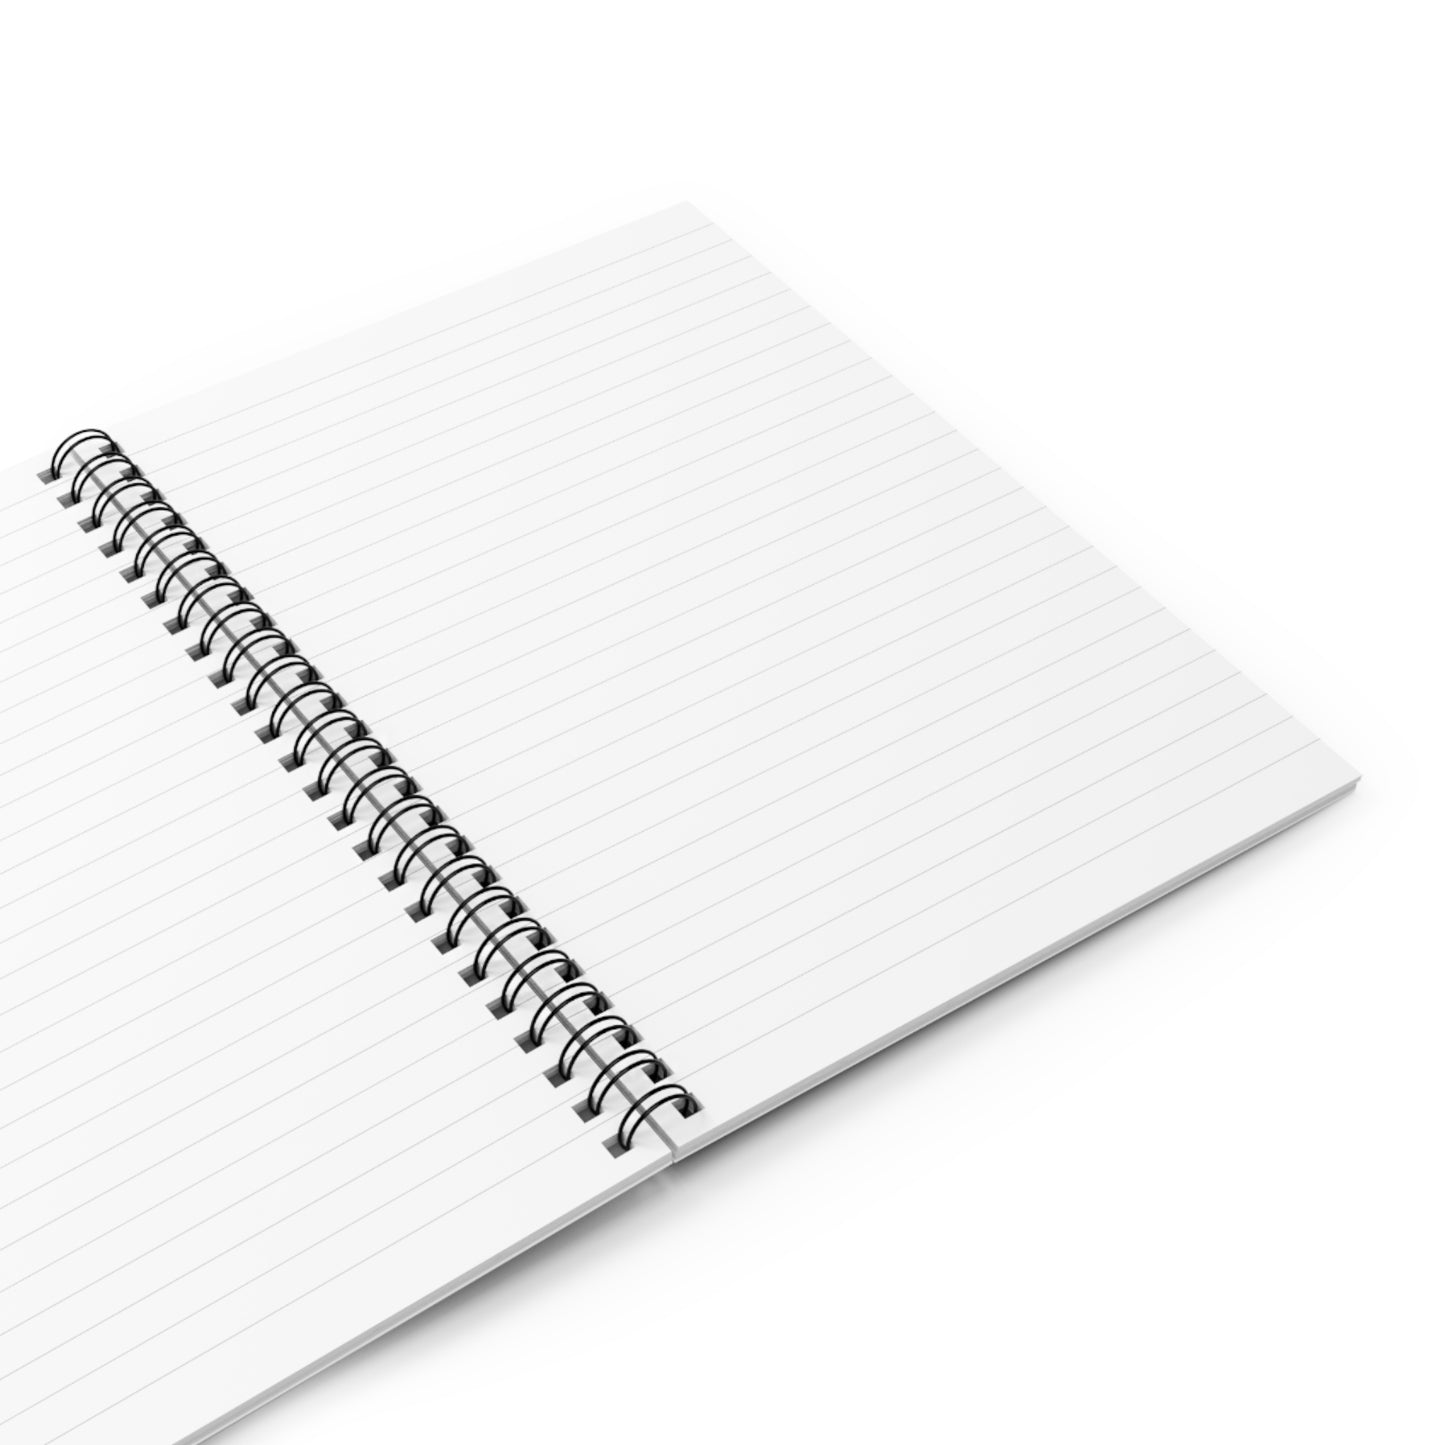 Spiral Notebook - Ruled Line 918 Spyder white background driving fast with water splashing 5